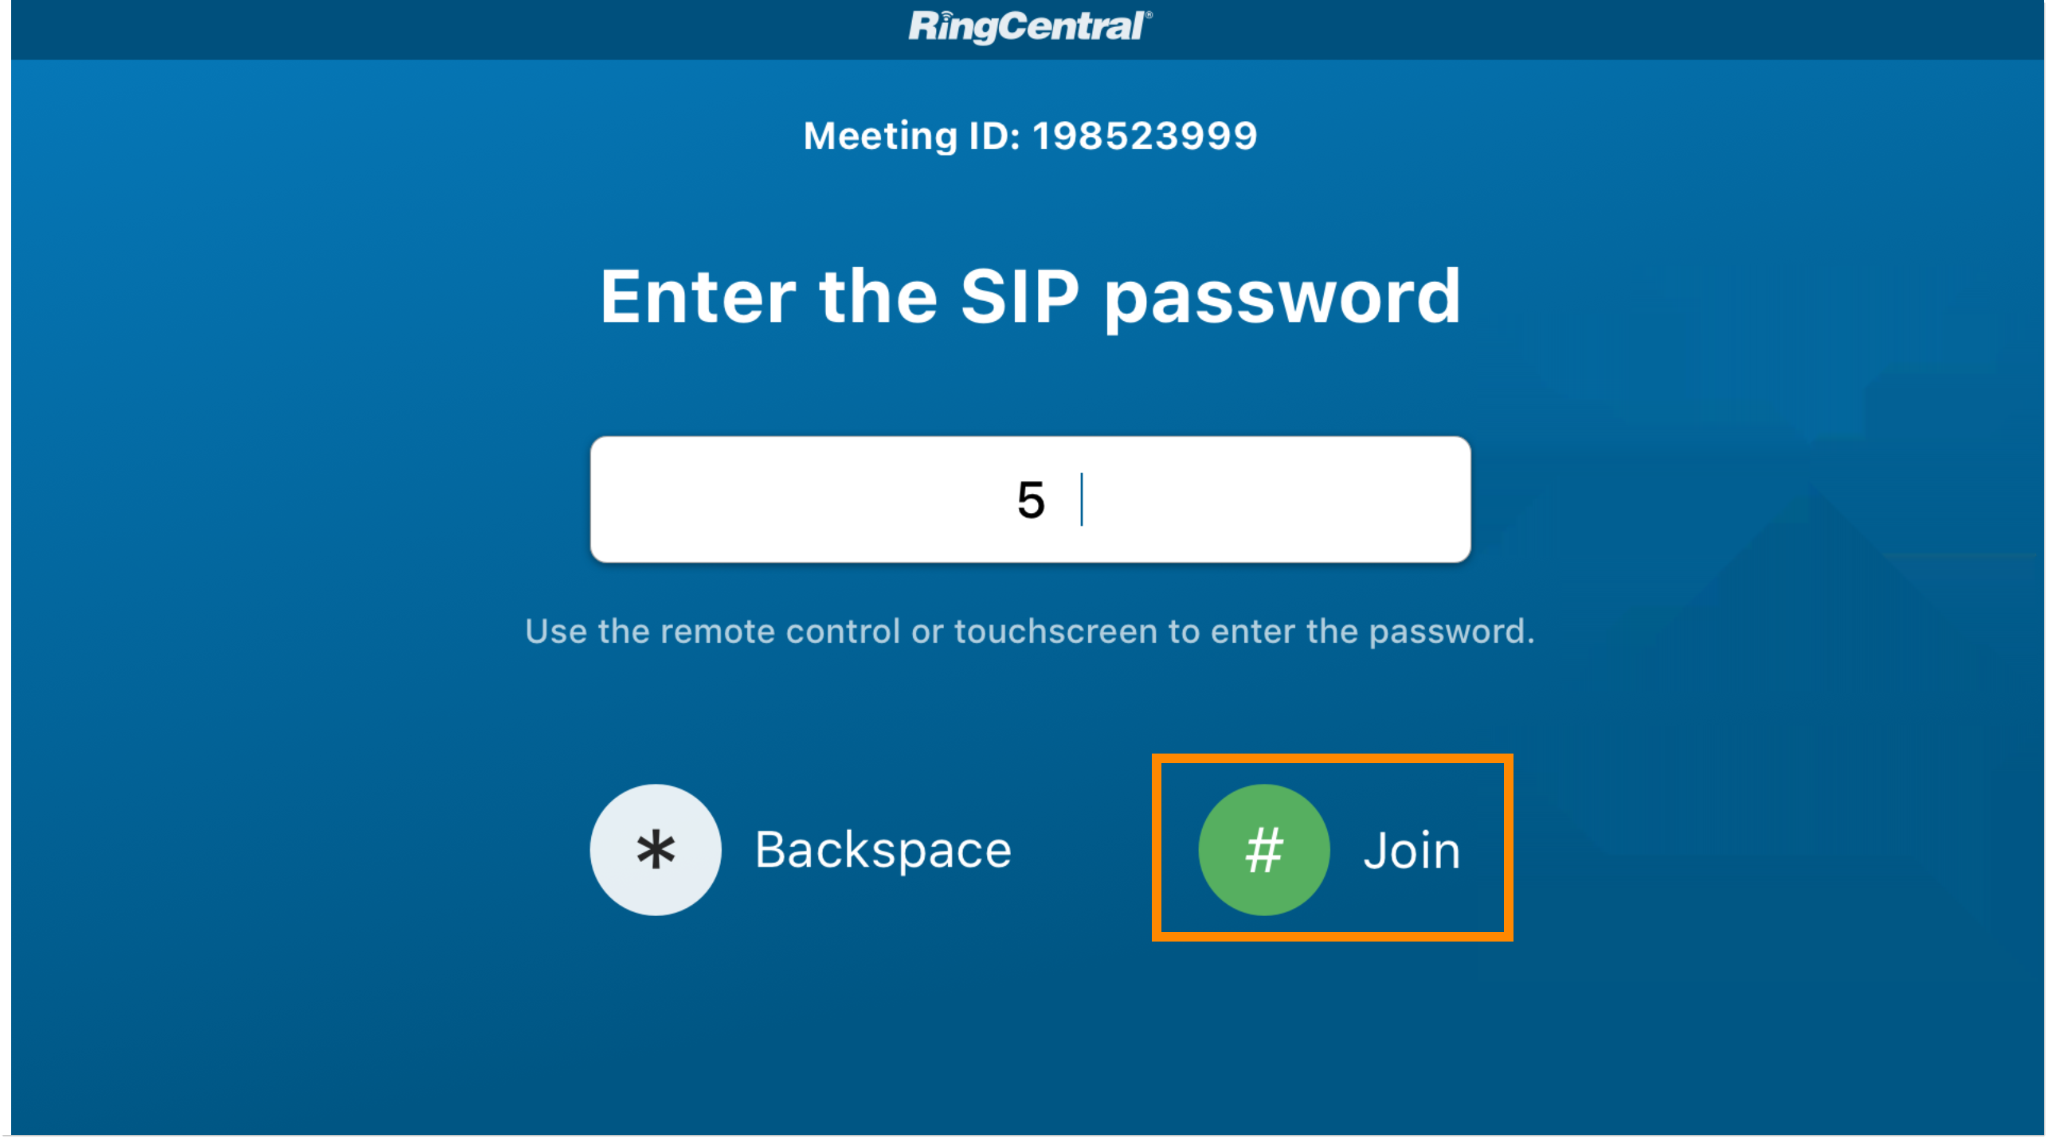 How to join a RingCentral Meeting: